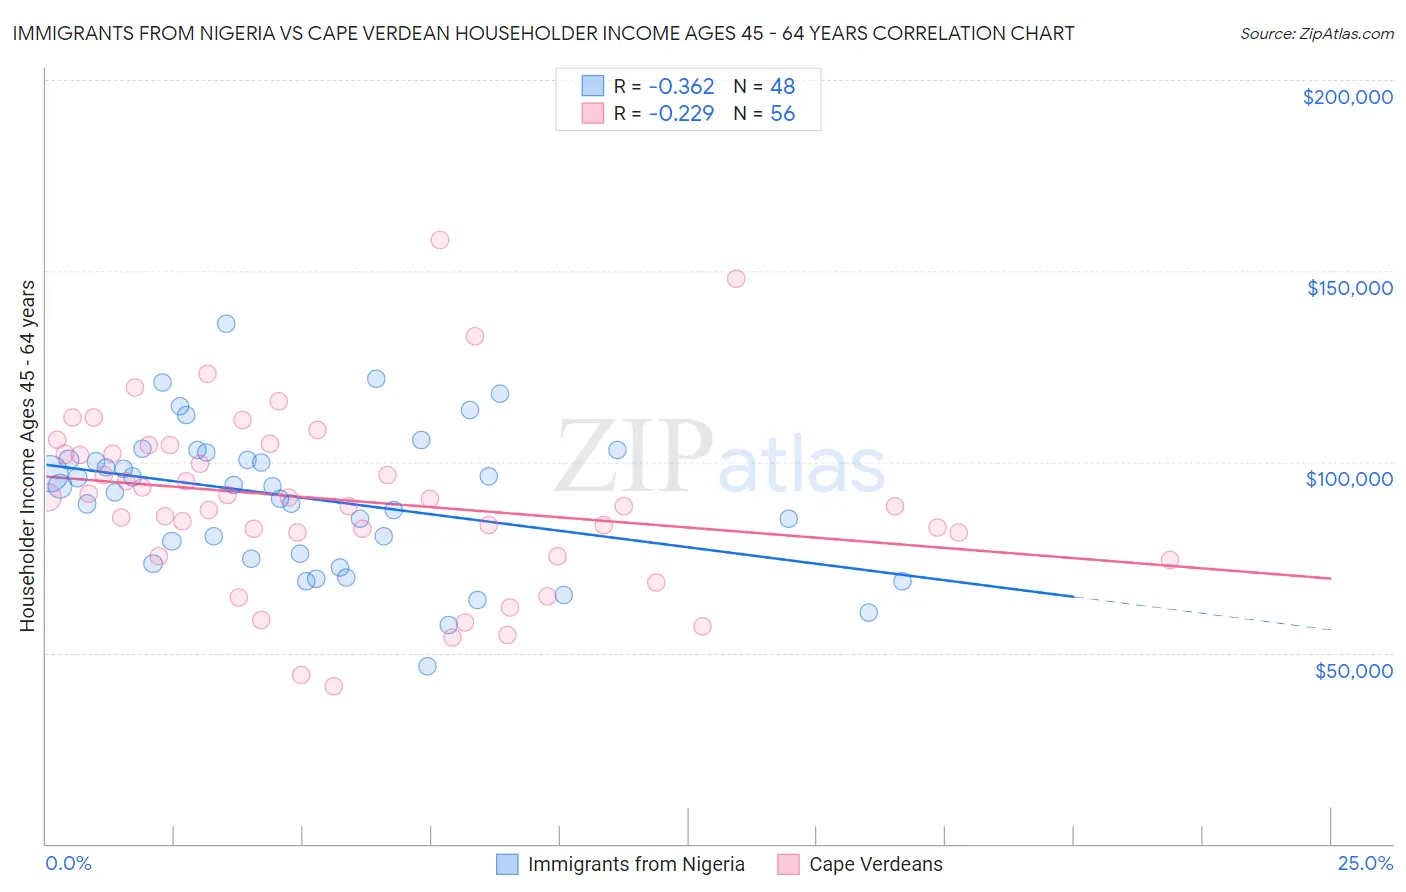 Immigrants from Nigeria vs Cape Verdean Householder Income Ages 45 - 64 years